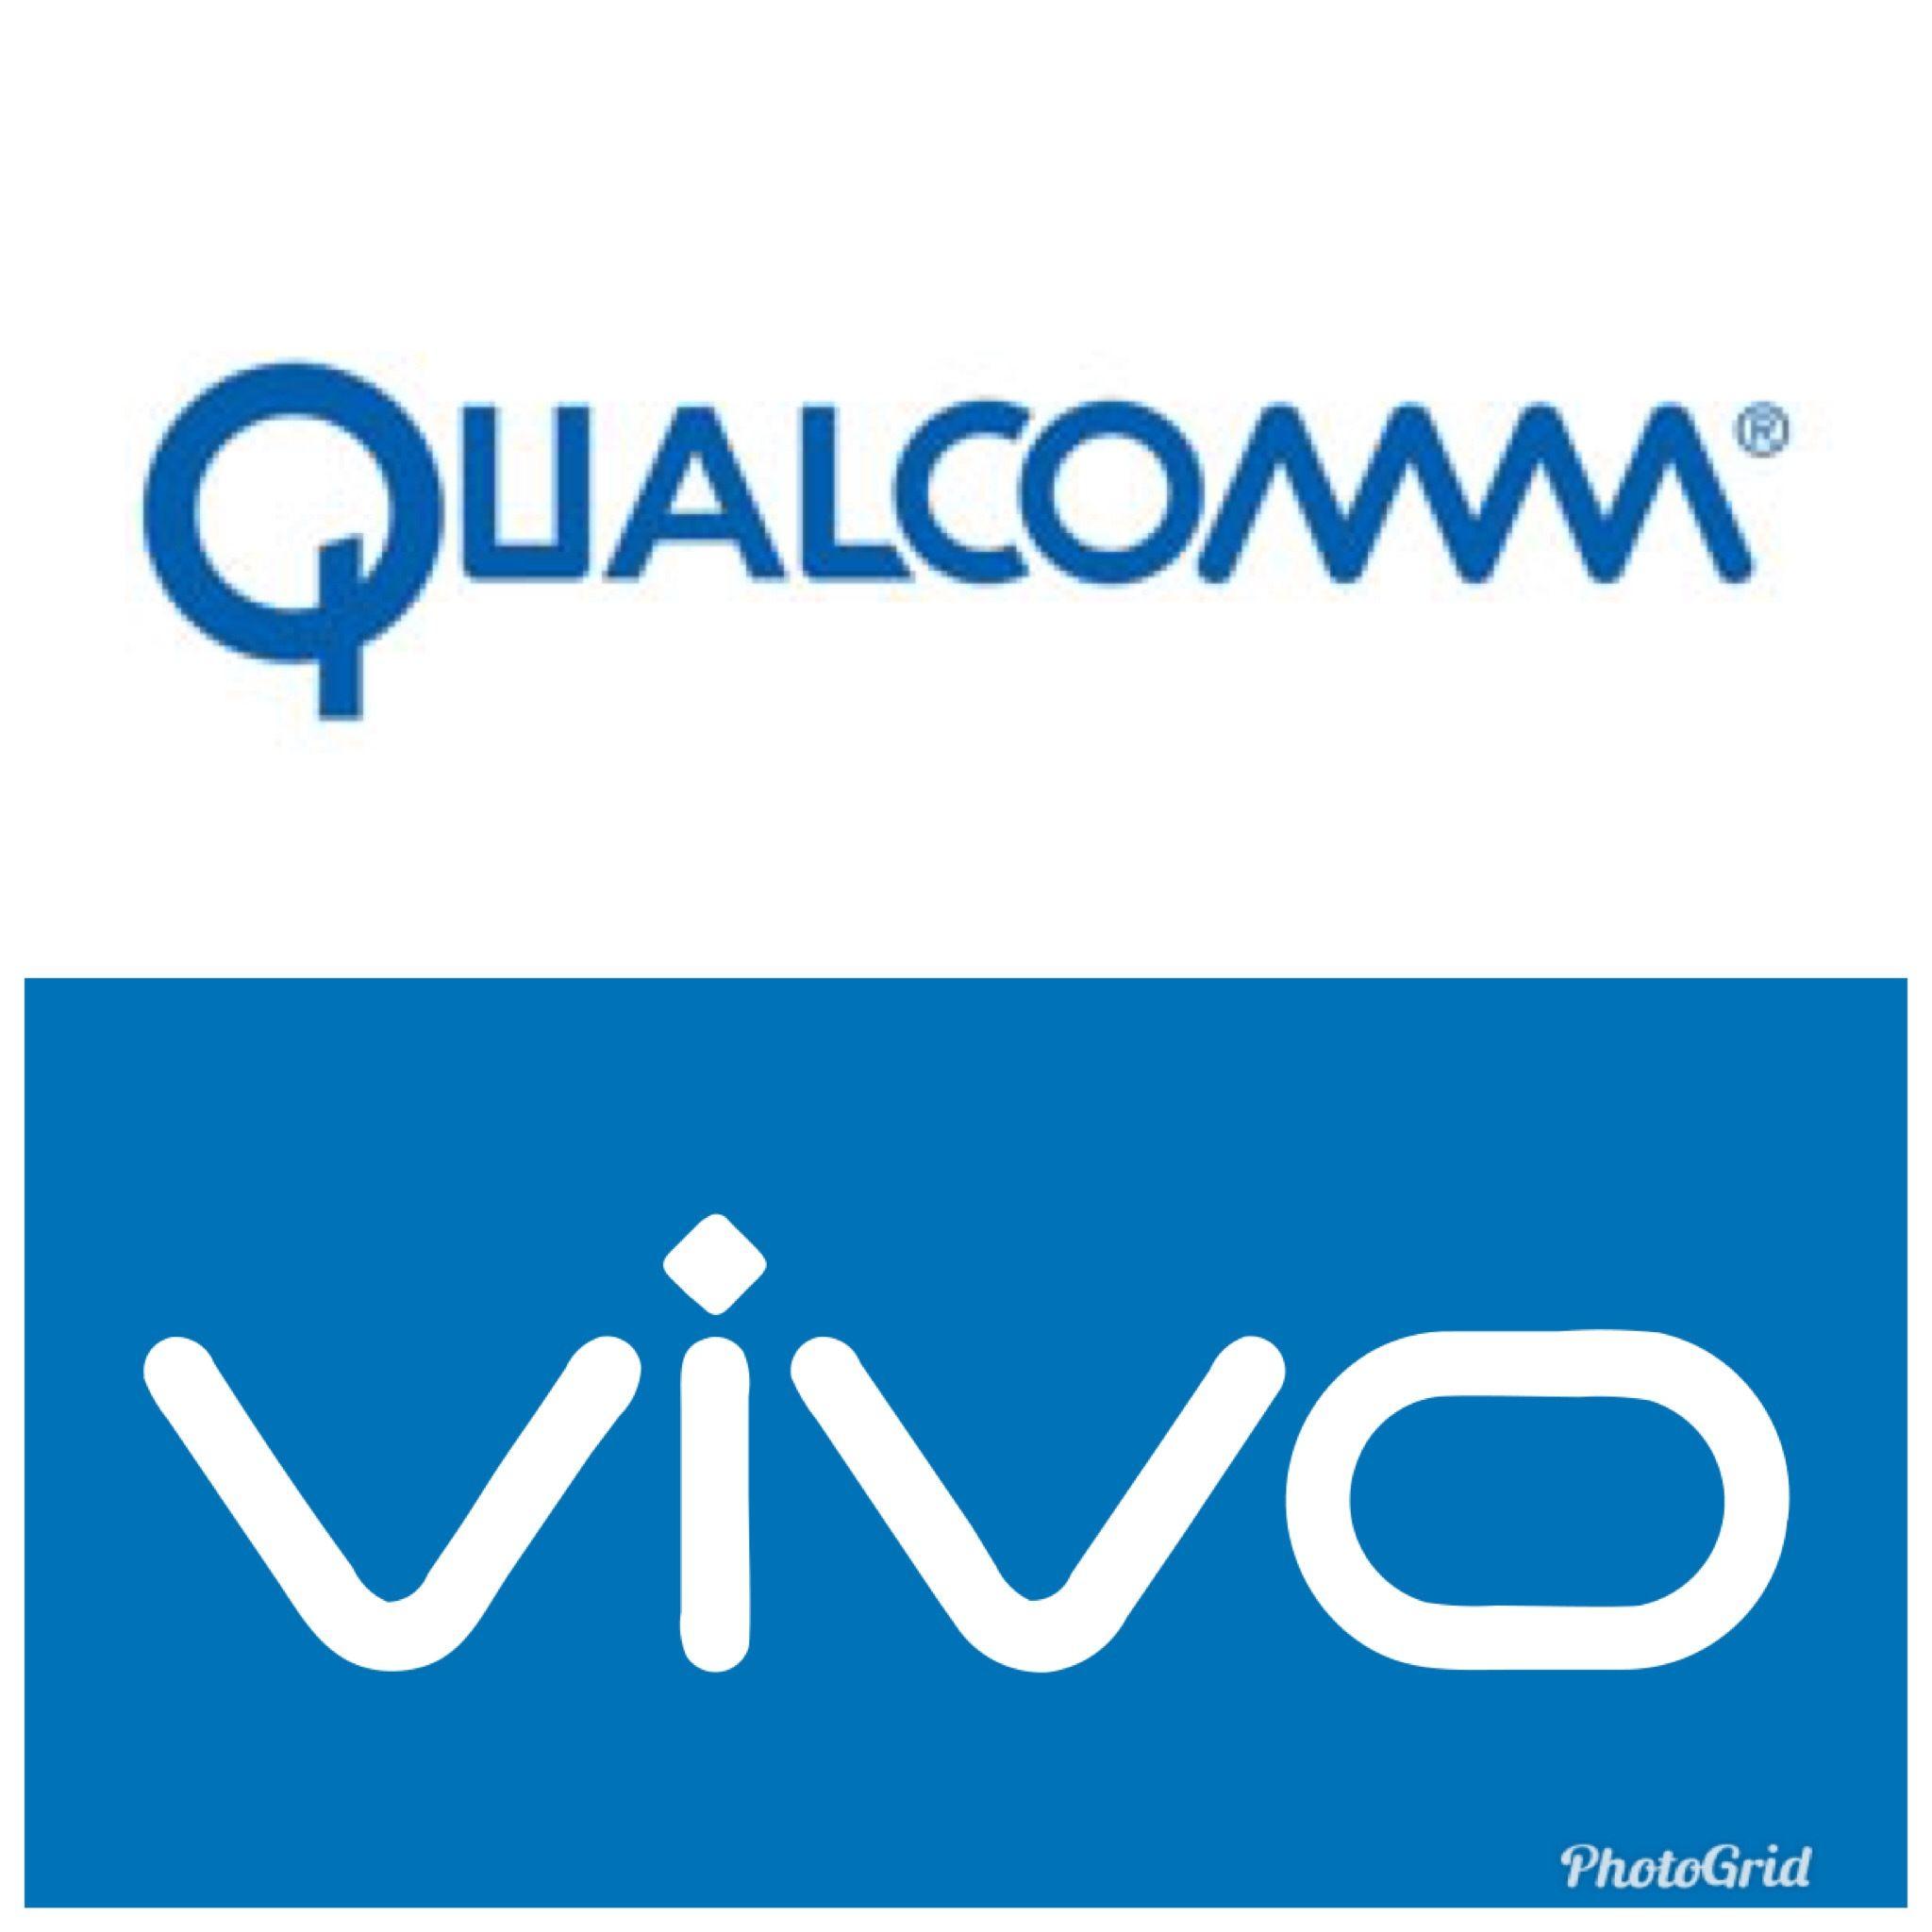 Vivo Phone Logo - Vivo strengthens top position in the mobile phone industry with a 4 ...